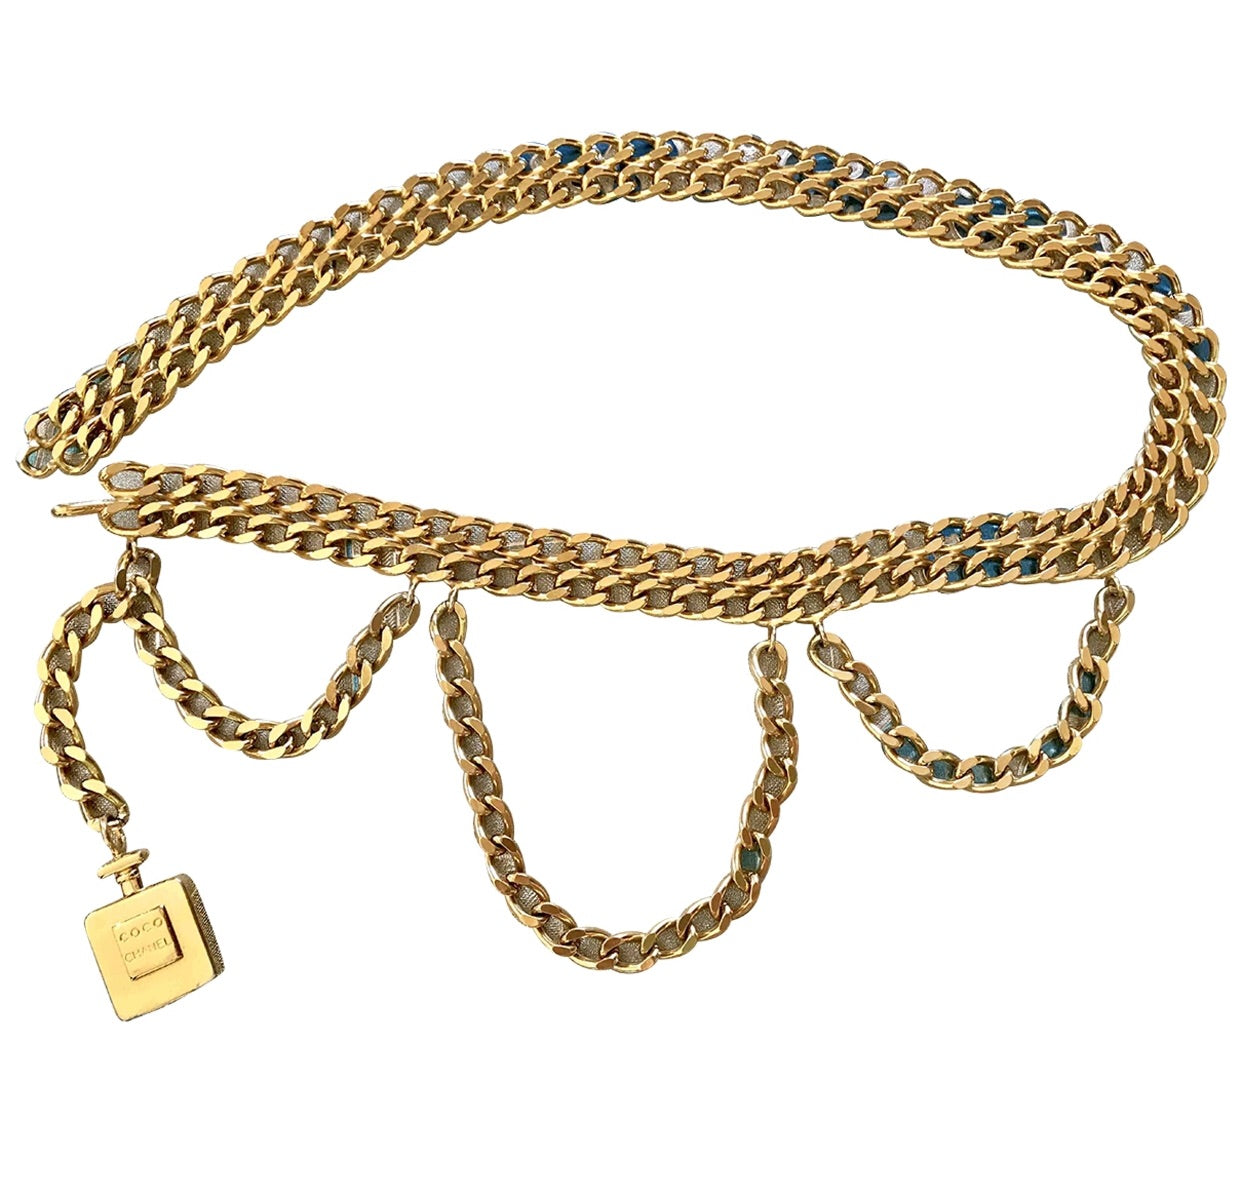 CHANEL 3 LAYERED BELT NECKLACE WITH 3 MEDALLION COINS – The Paris  Mademoiselle